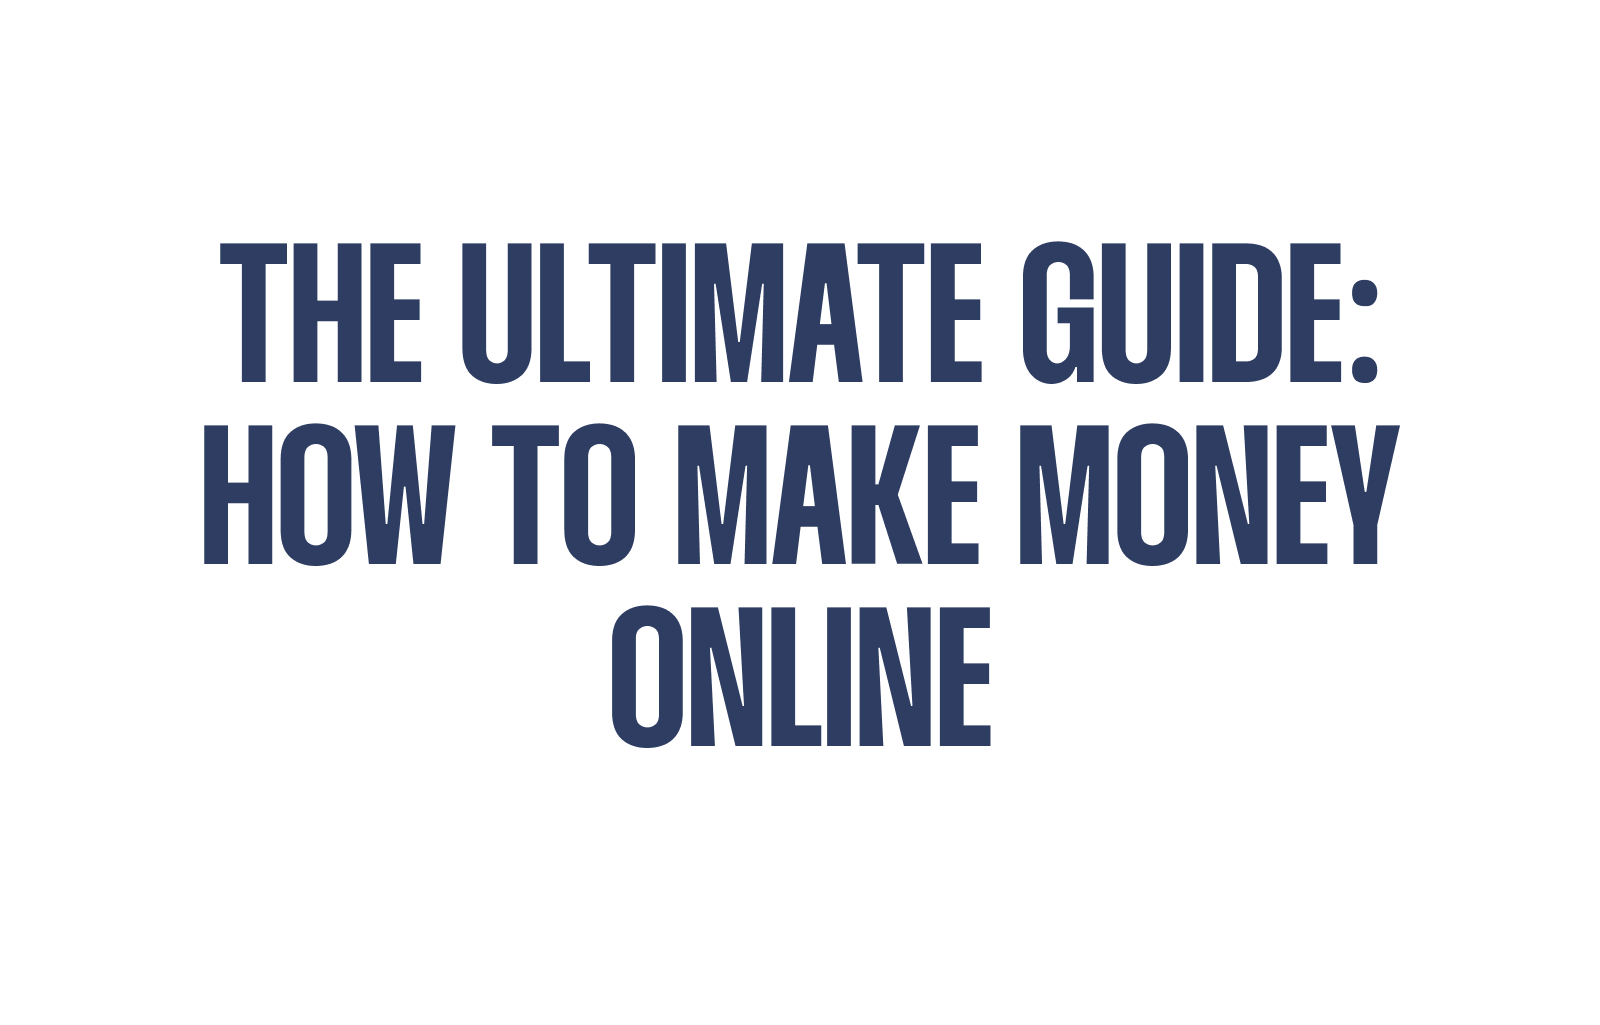 The Ultimate Guide: How to Make Money Online